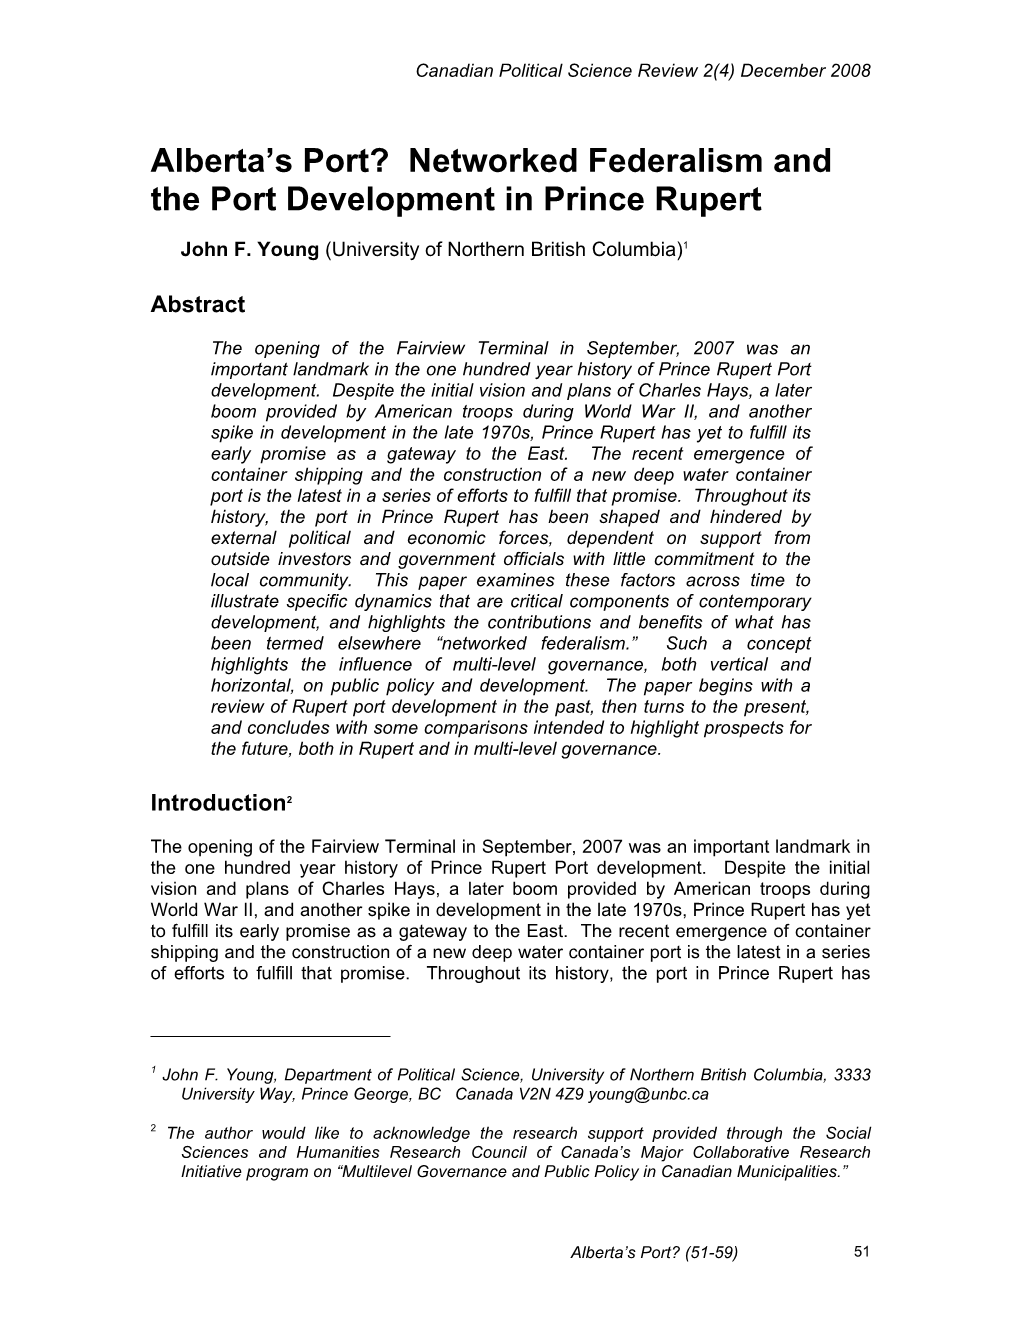 Alberta's Port? Networked Federalism and the Port Development in Prince Rupert